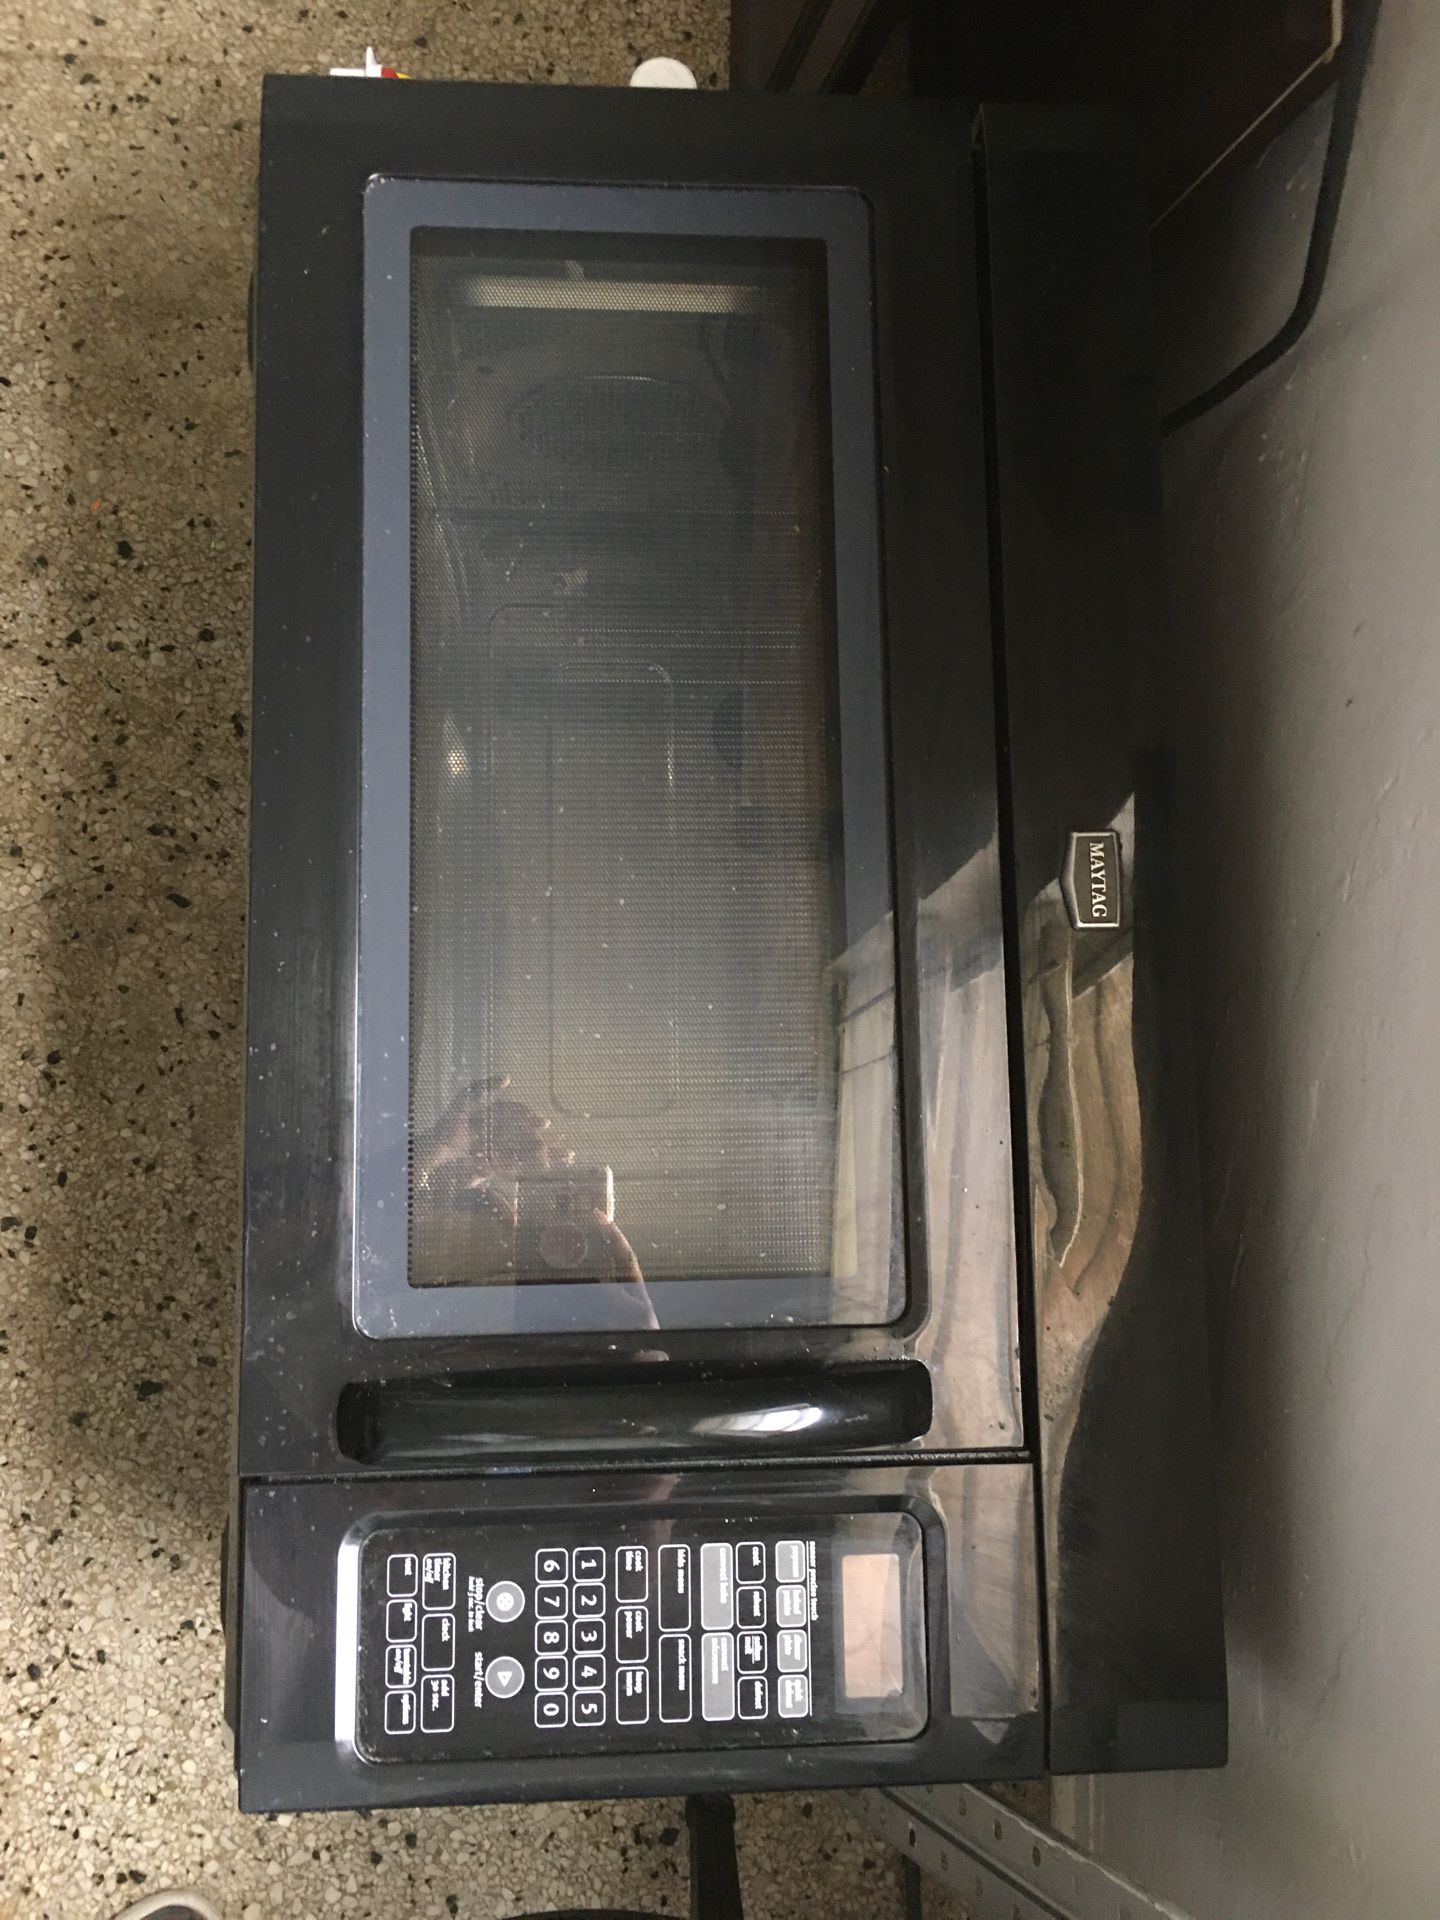 Maytag conventional microwave oven